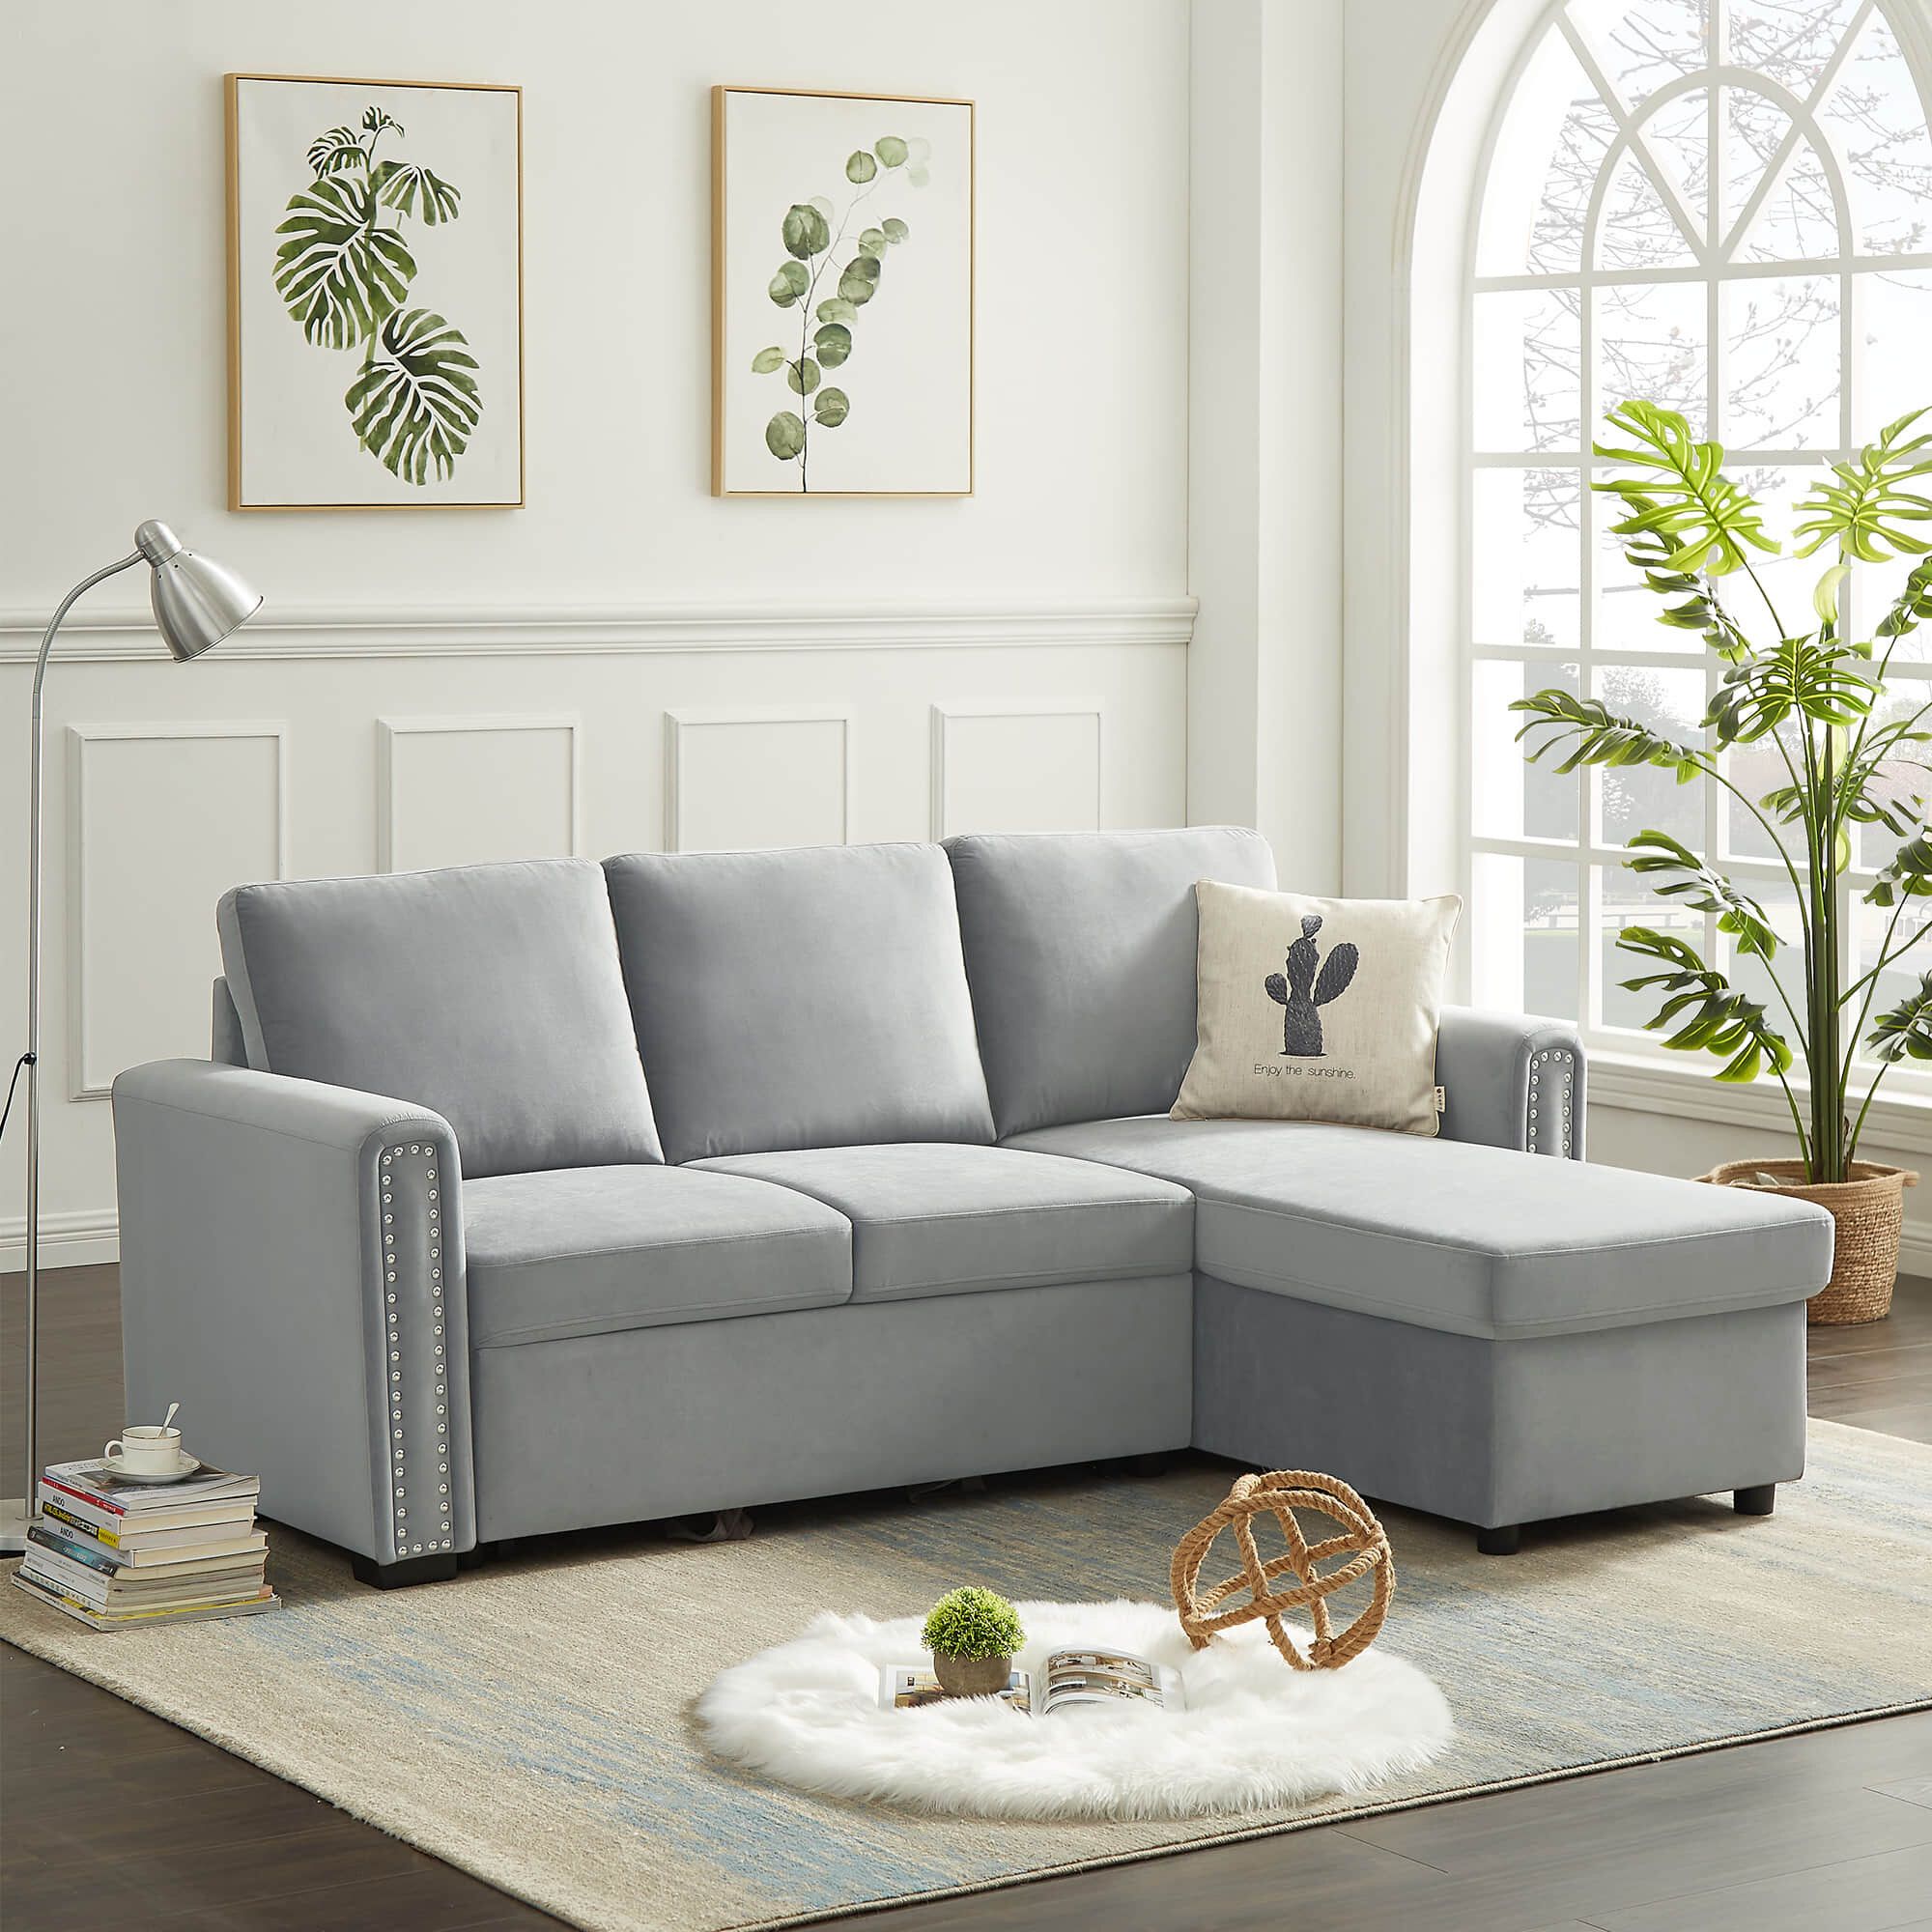 Latitude Run® 83" Convertible Sectional Sofa Couch, 3 Seater L Shape Corner Couch  Sofa Bed With Storage For Living Room Apartment | Wayfair In 3 Seat Convertible Sectional Sofas (View 9 of 15)